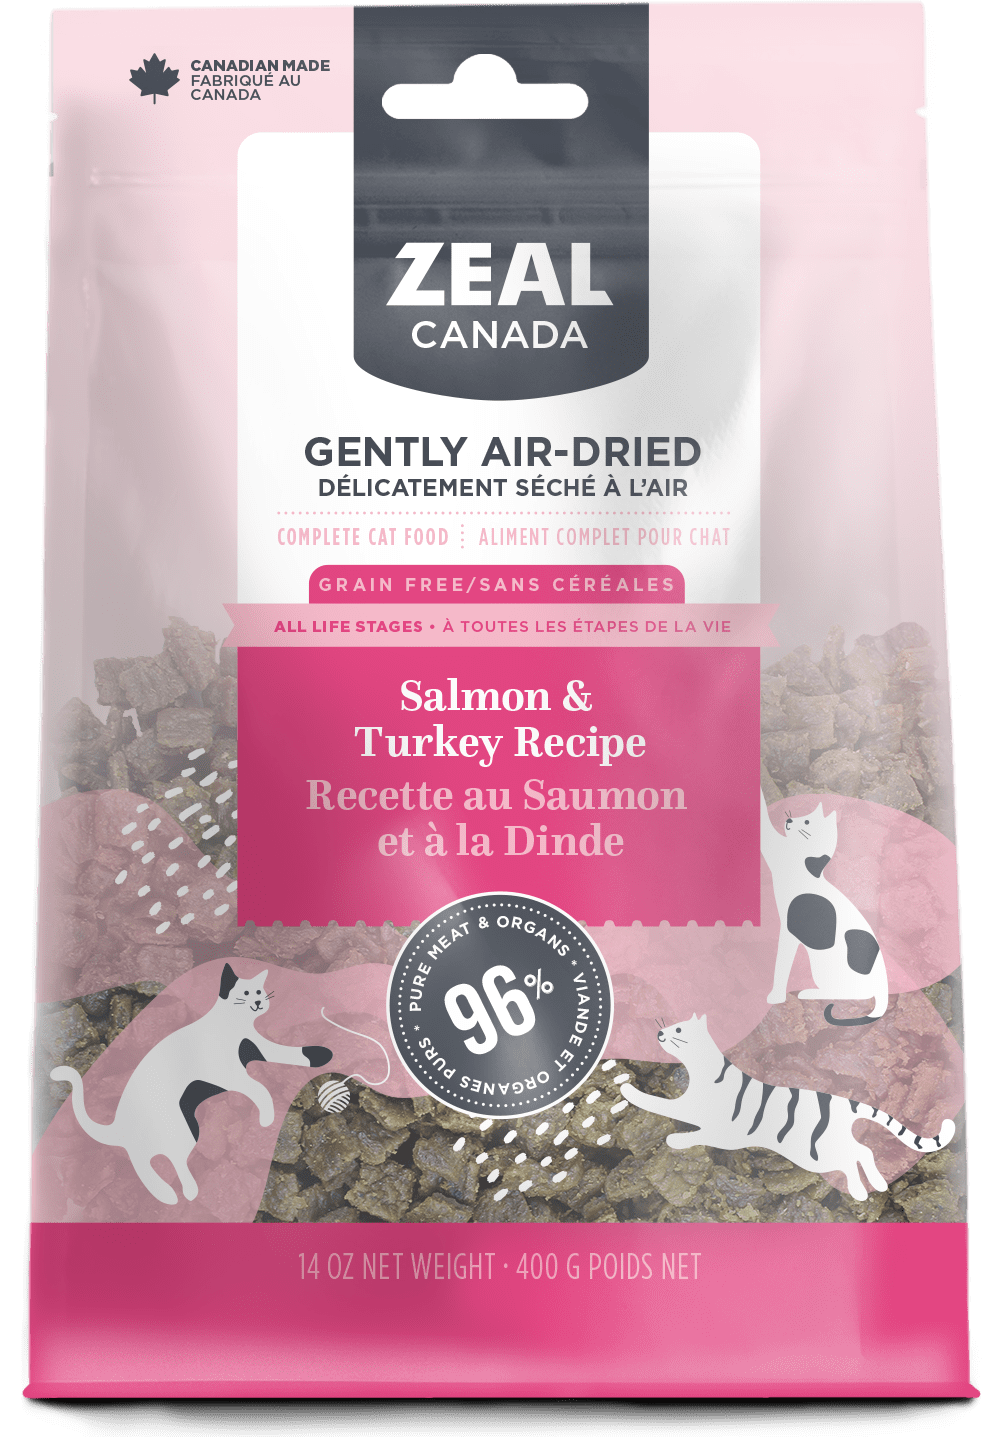 Salmon and Turkey Recipe - Air Dried Cat Food - Zeal - PetToba-Zeal